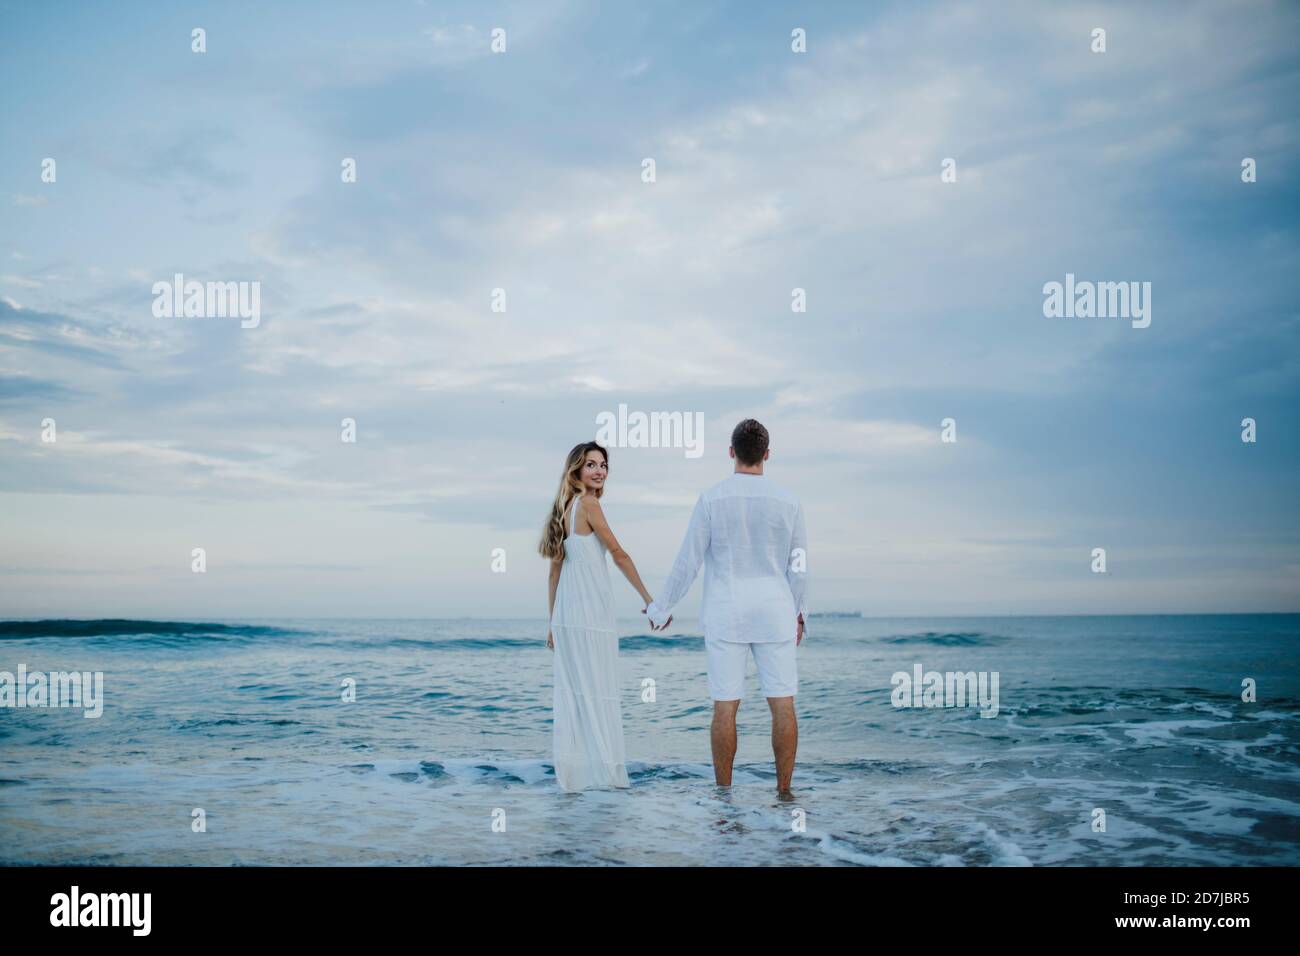 Woman looking behind while holding hand of man standing in water at beach Stock Photo